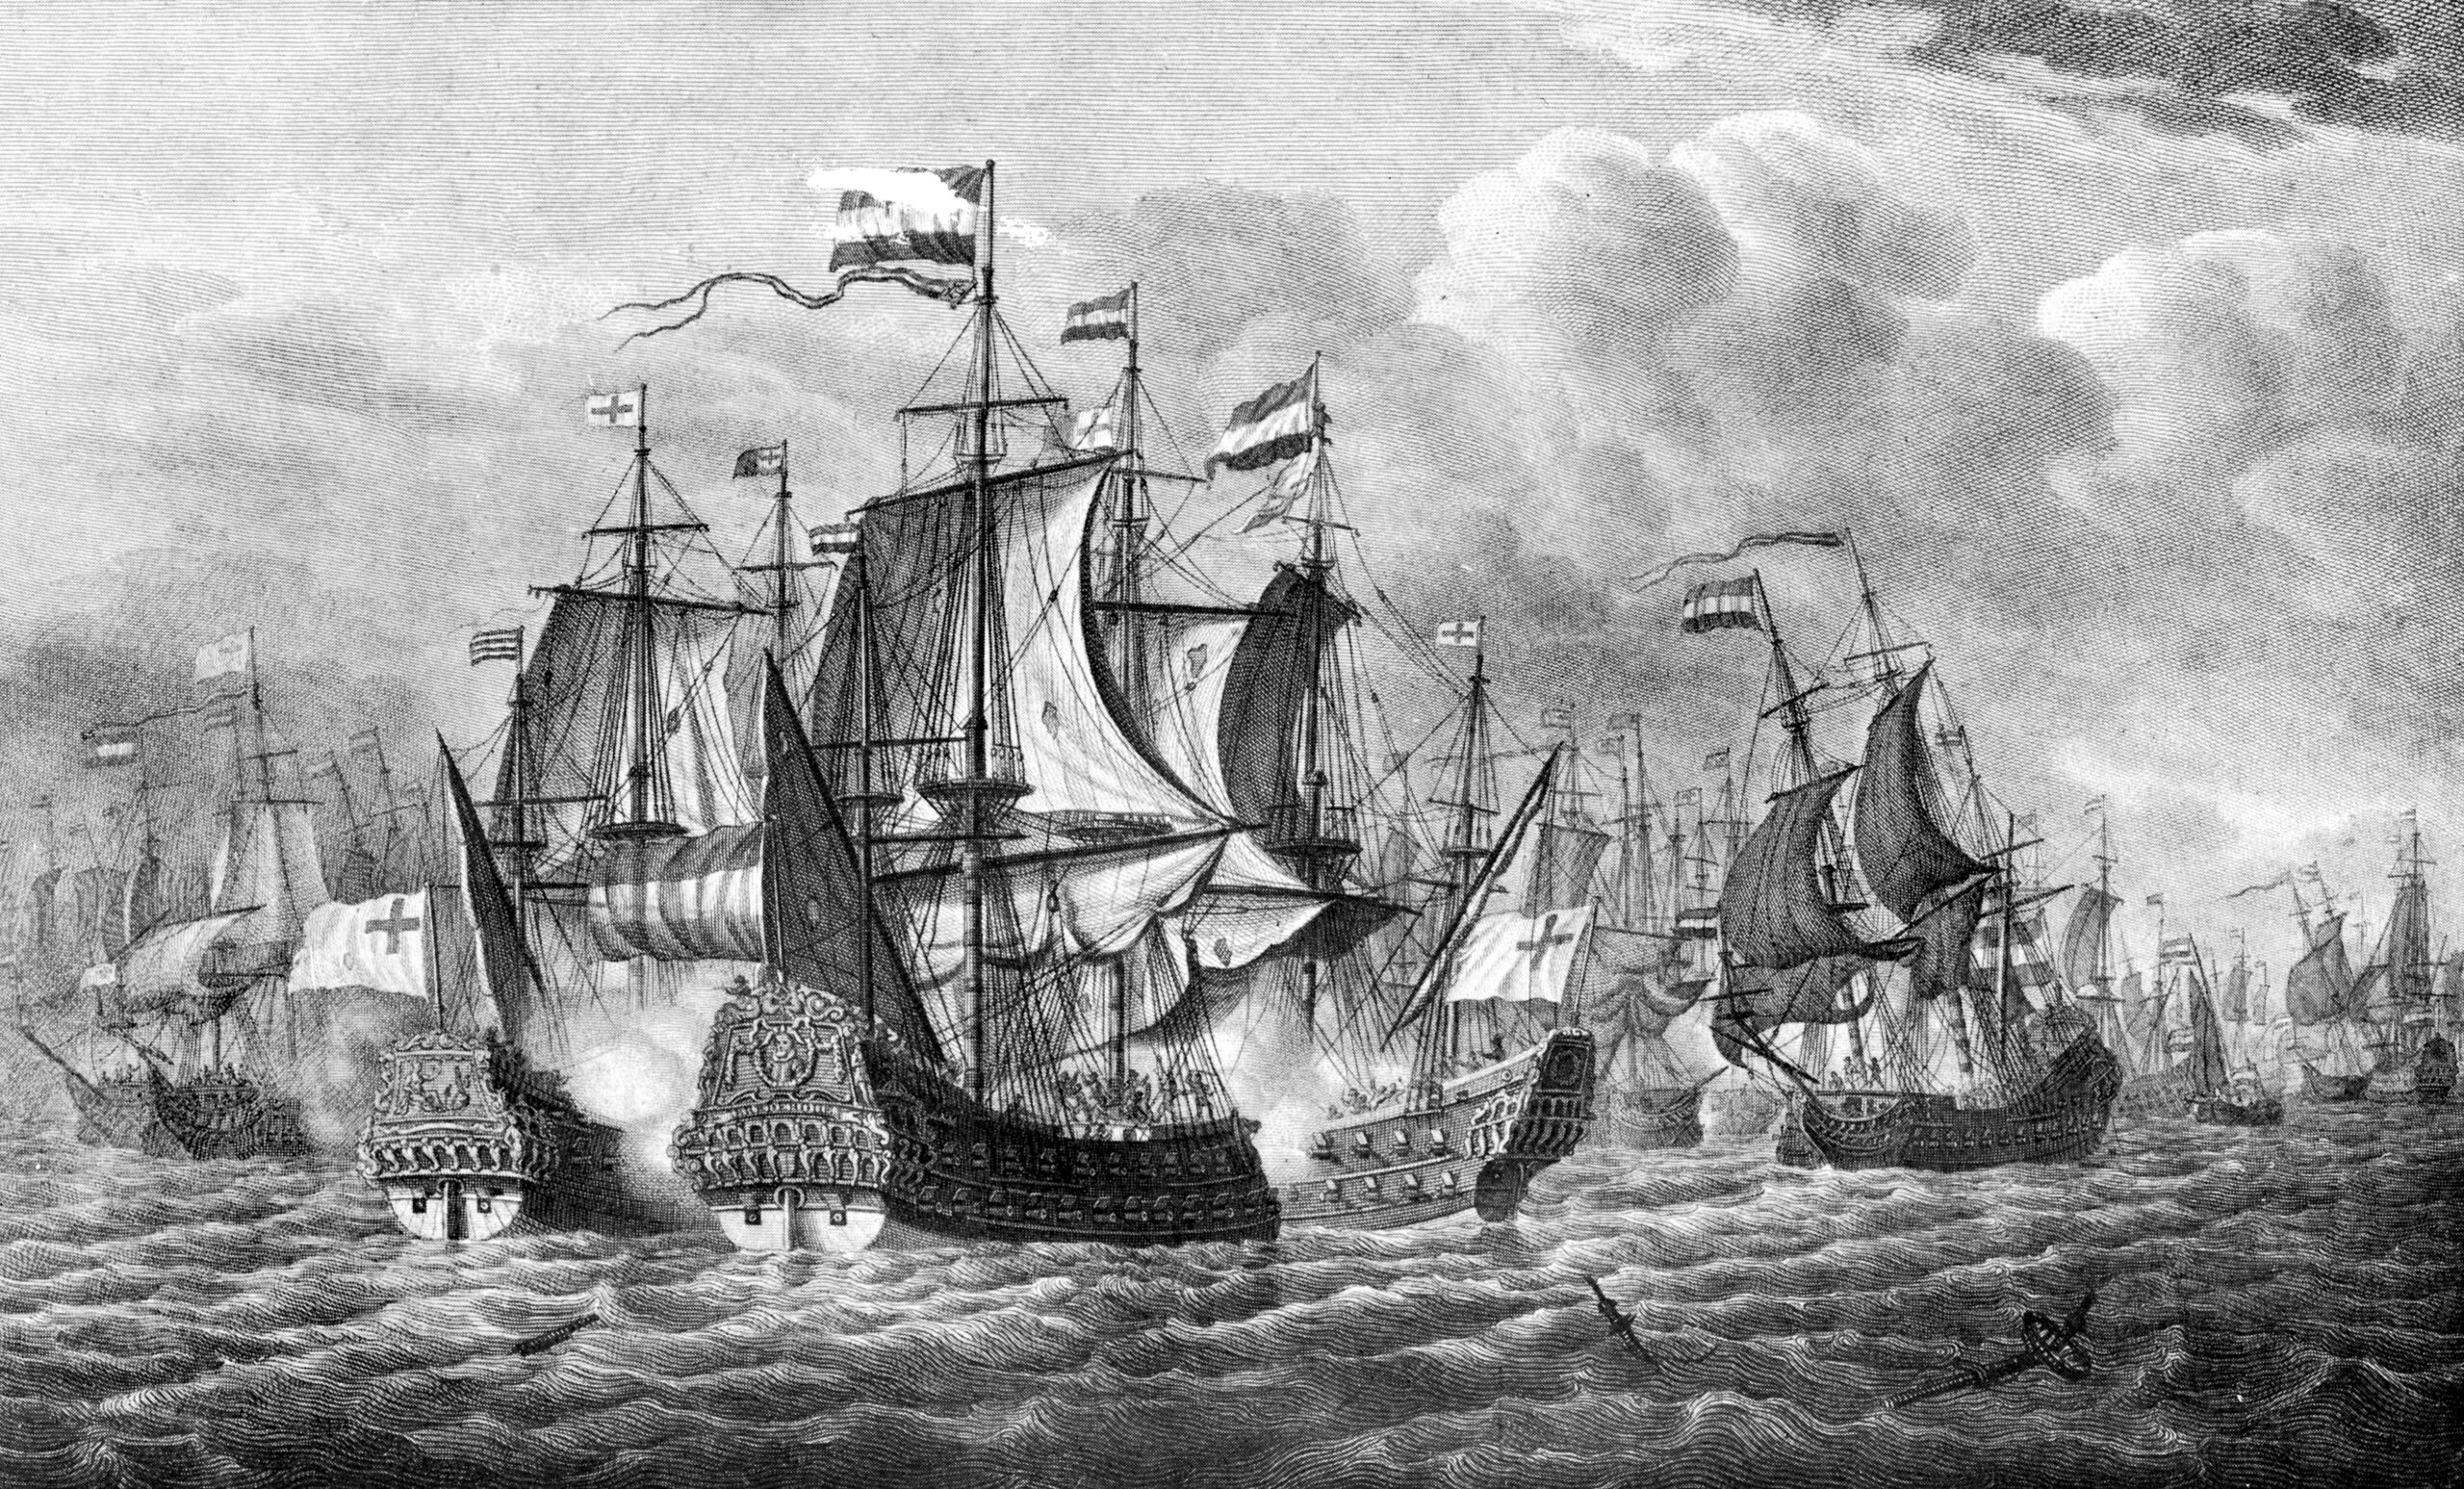 Shortly after passage of the provocative British Navigation Act of 1651, a new Dutch fleet was sent to protect Dutch shipping interests. It would not be long before the world’s two largest sea powers would square off against one another.